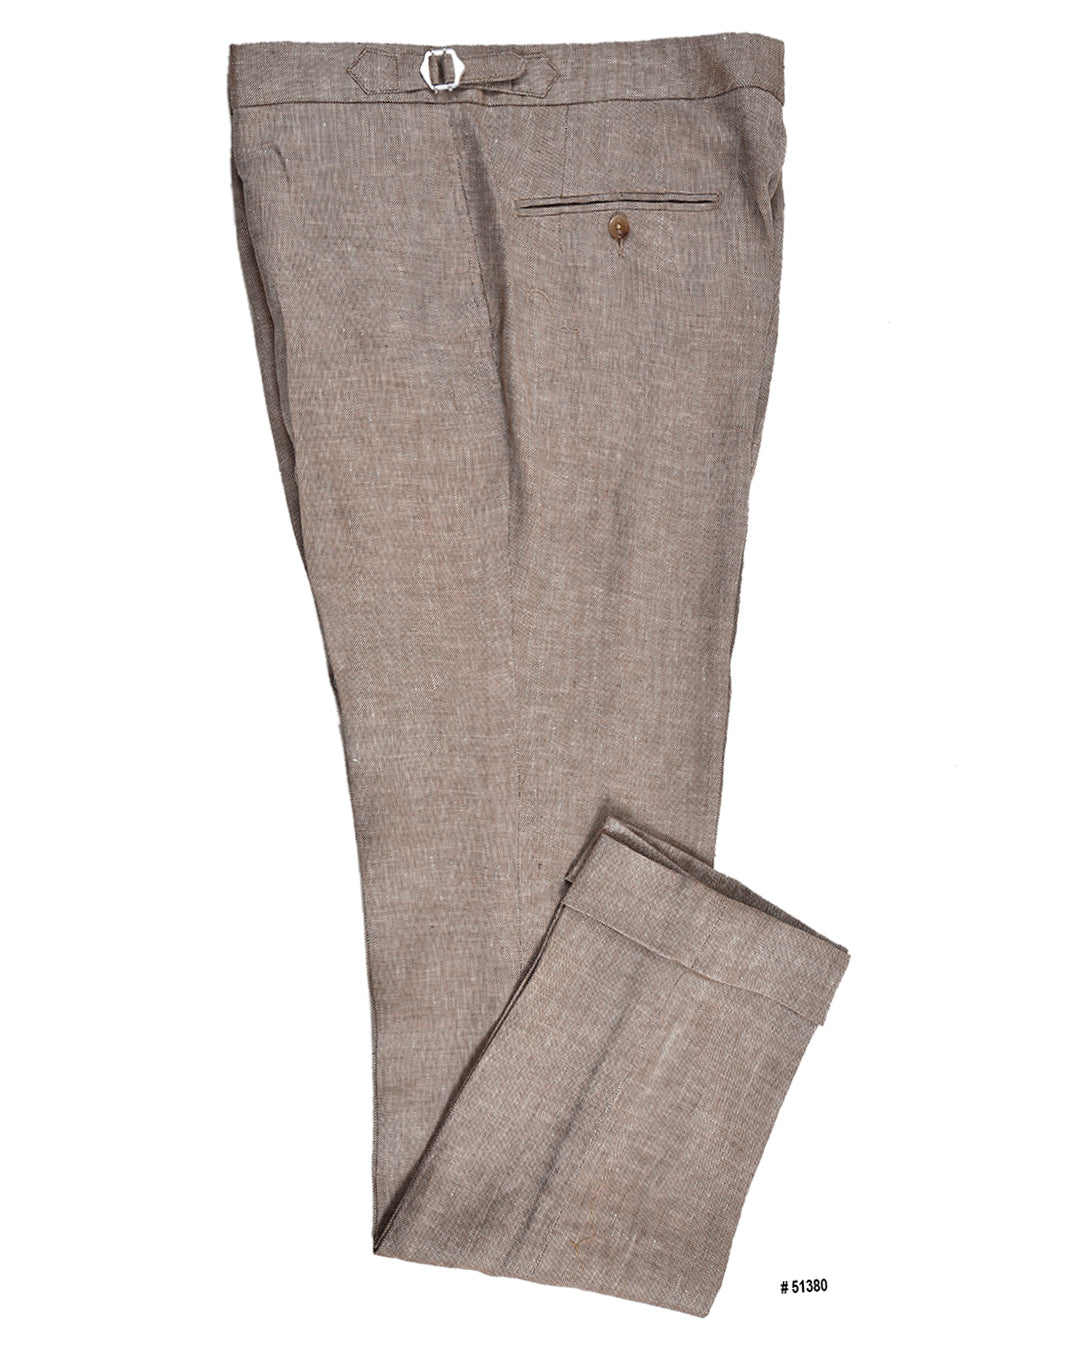 Side view of custom linen pants for men by Luxire in brown cream